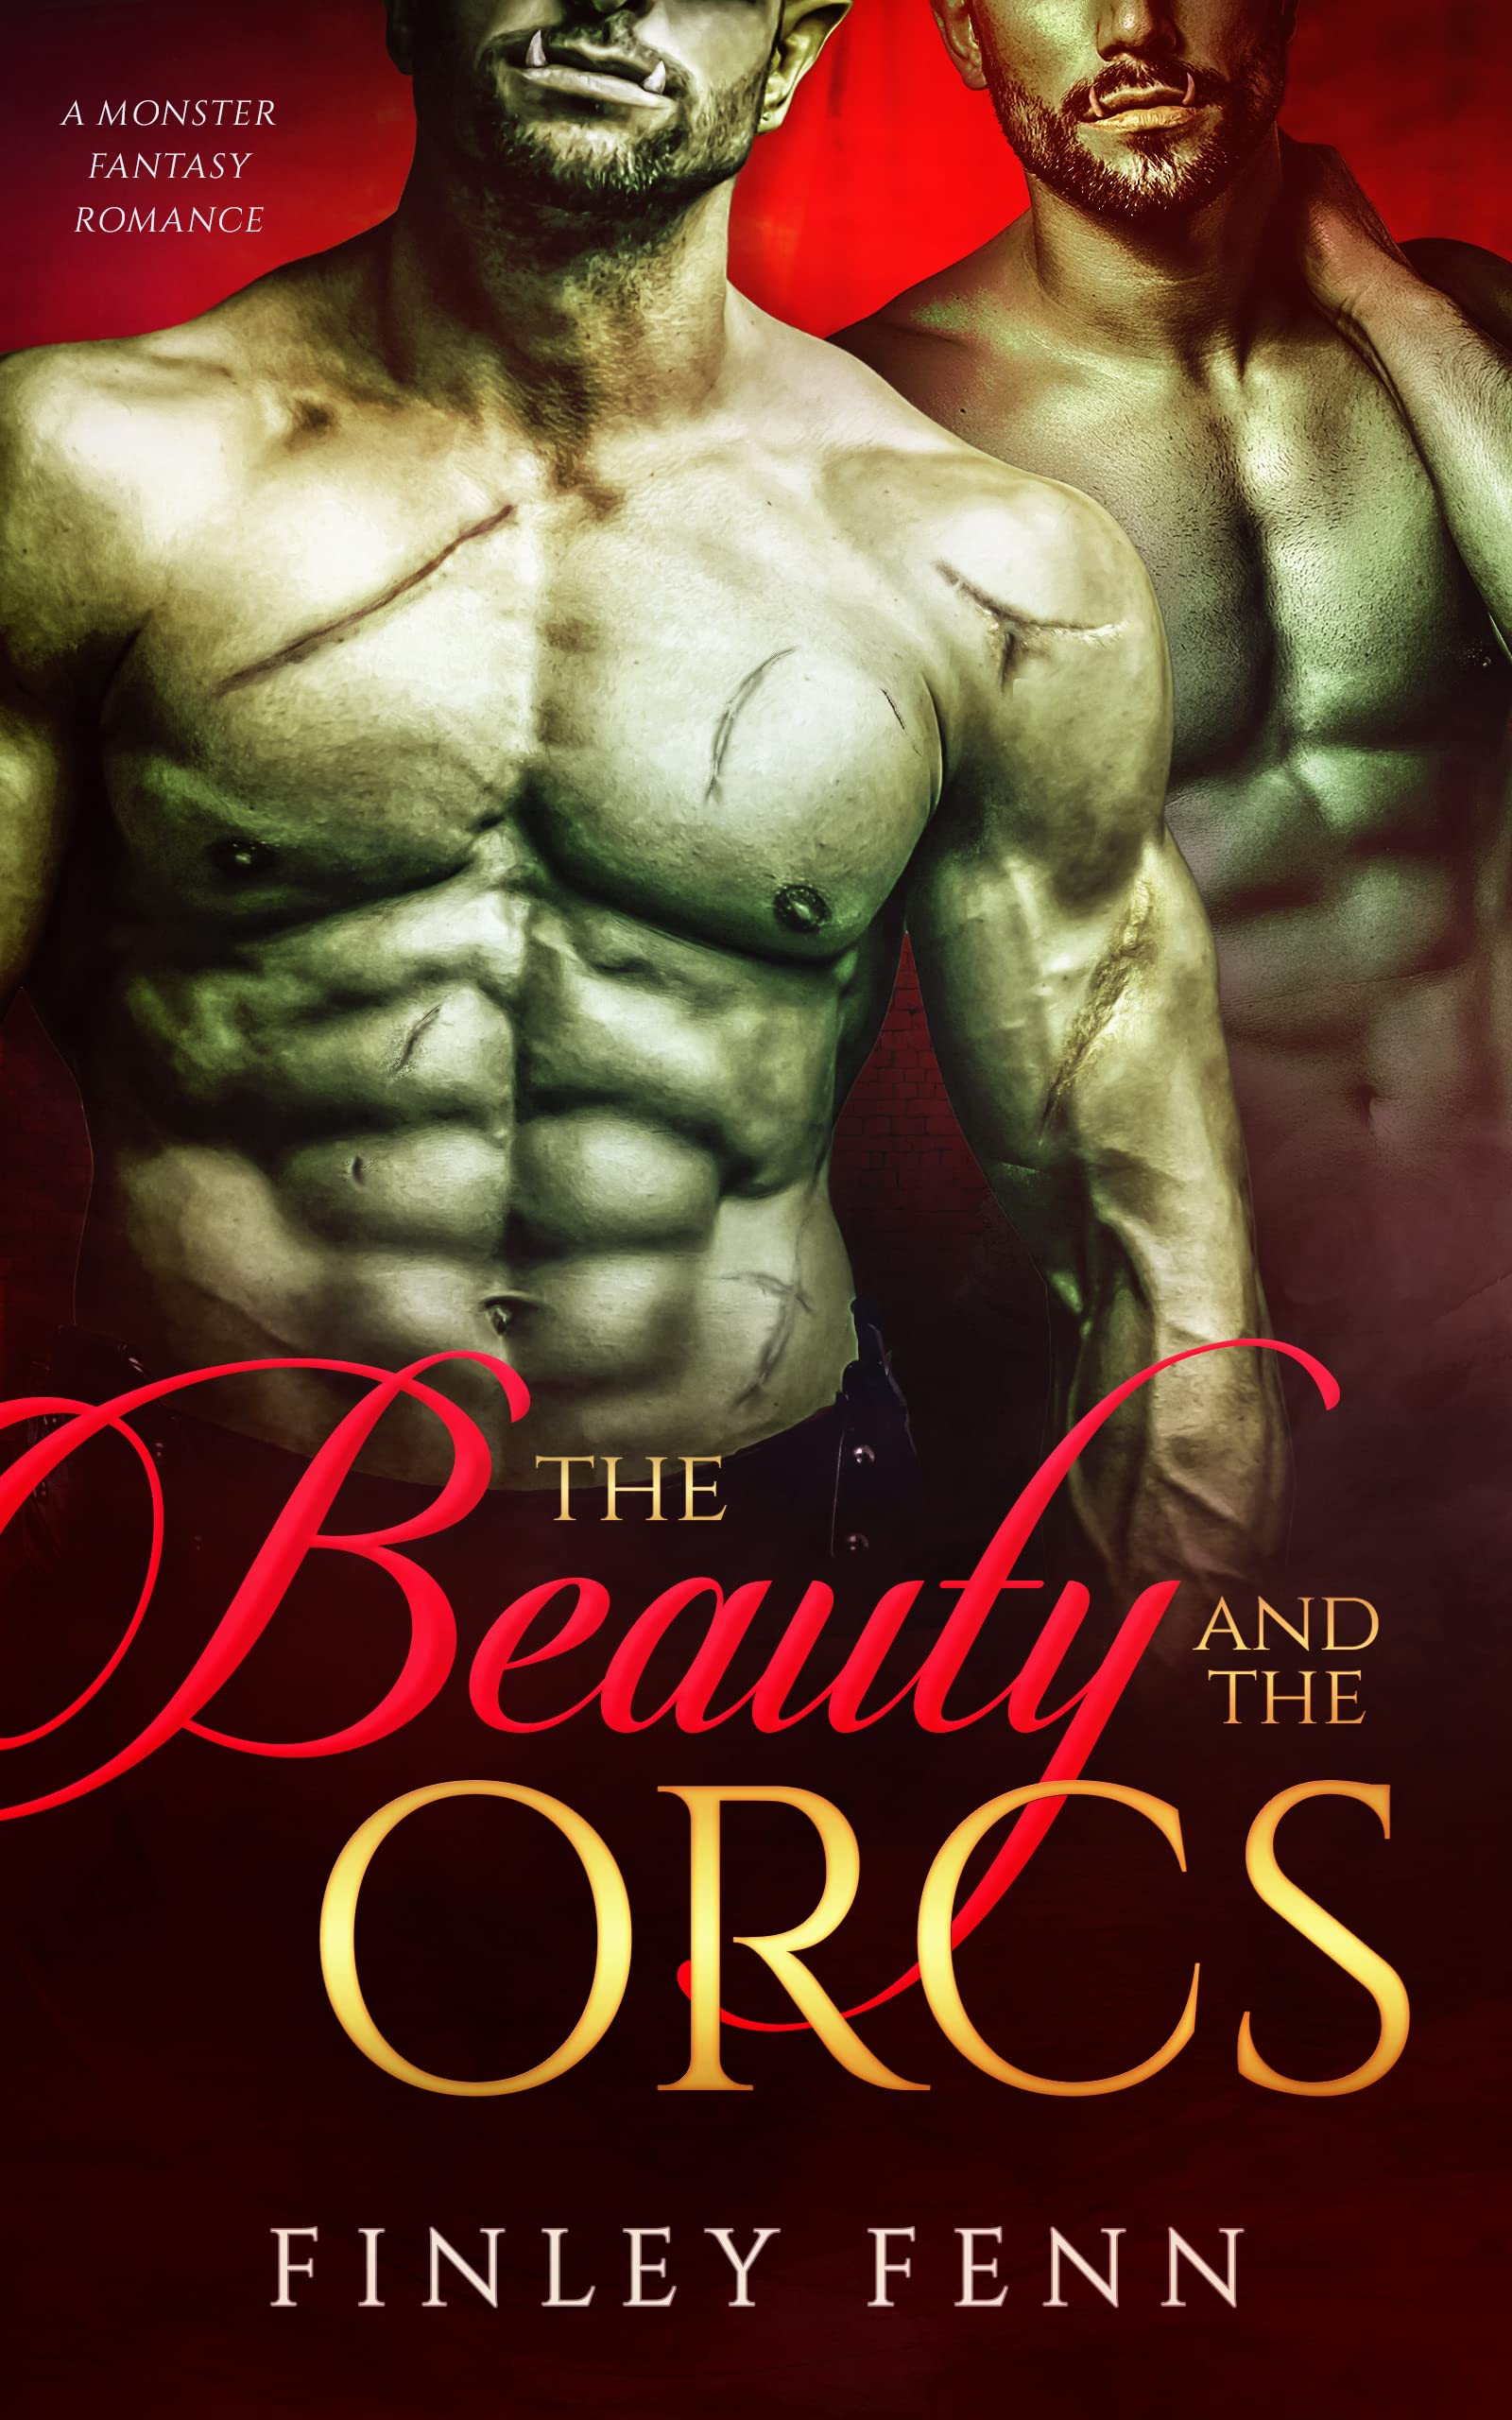 The Beauty and the Orcs